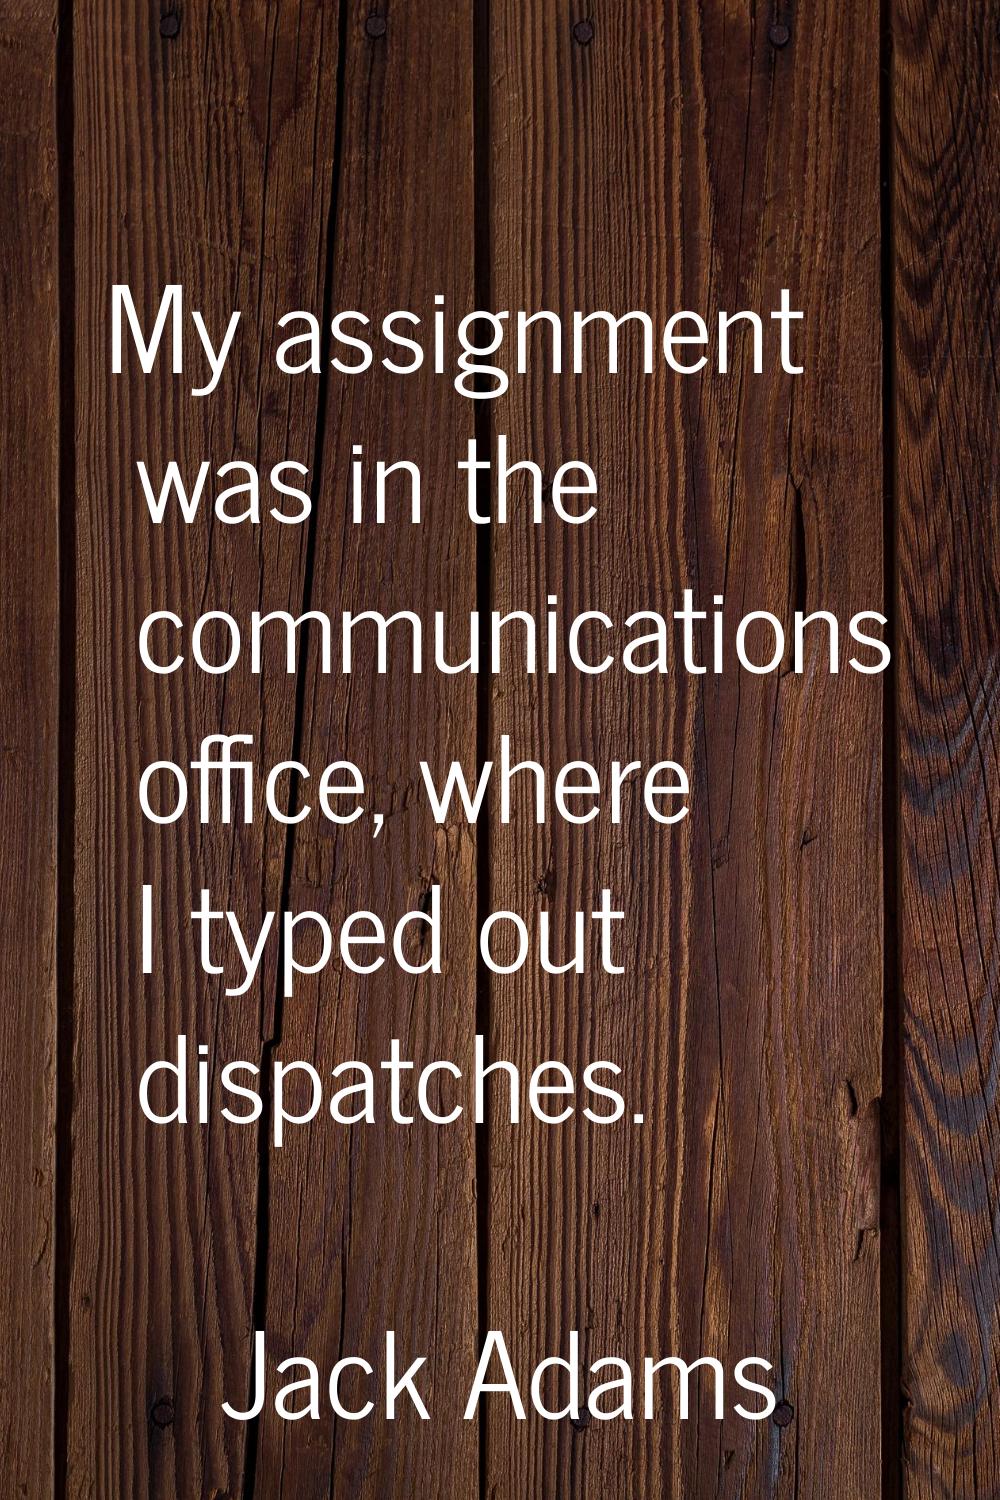 My assignment was in the communications office, where I typed out dispatches.